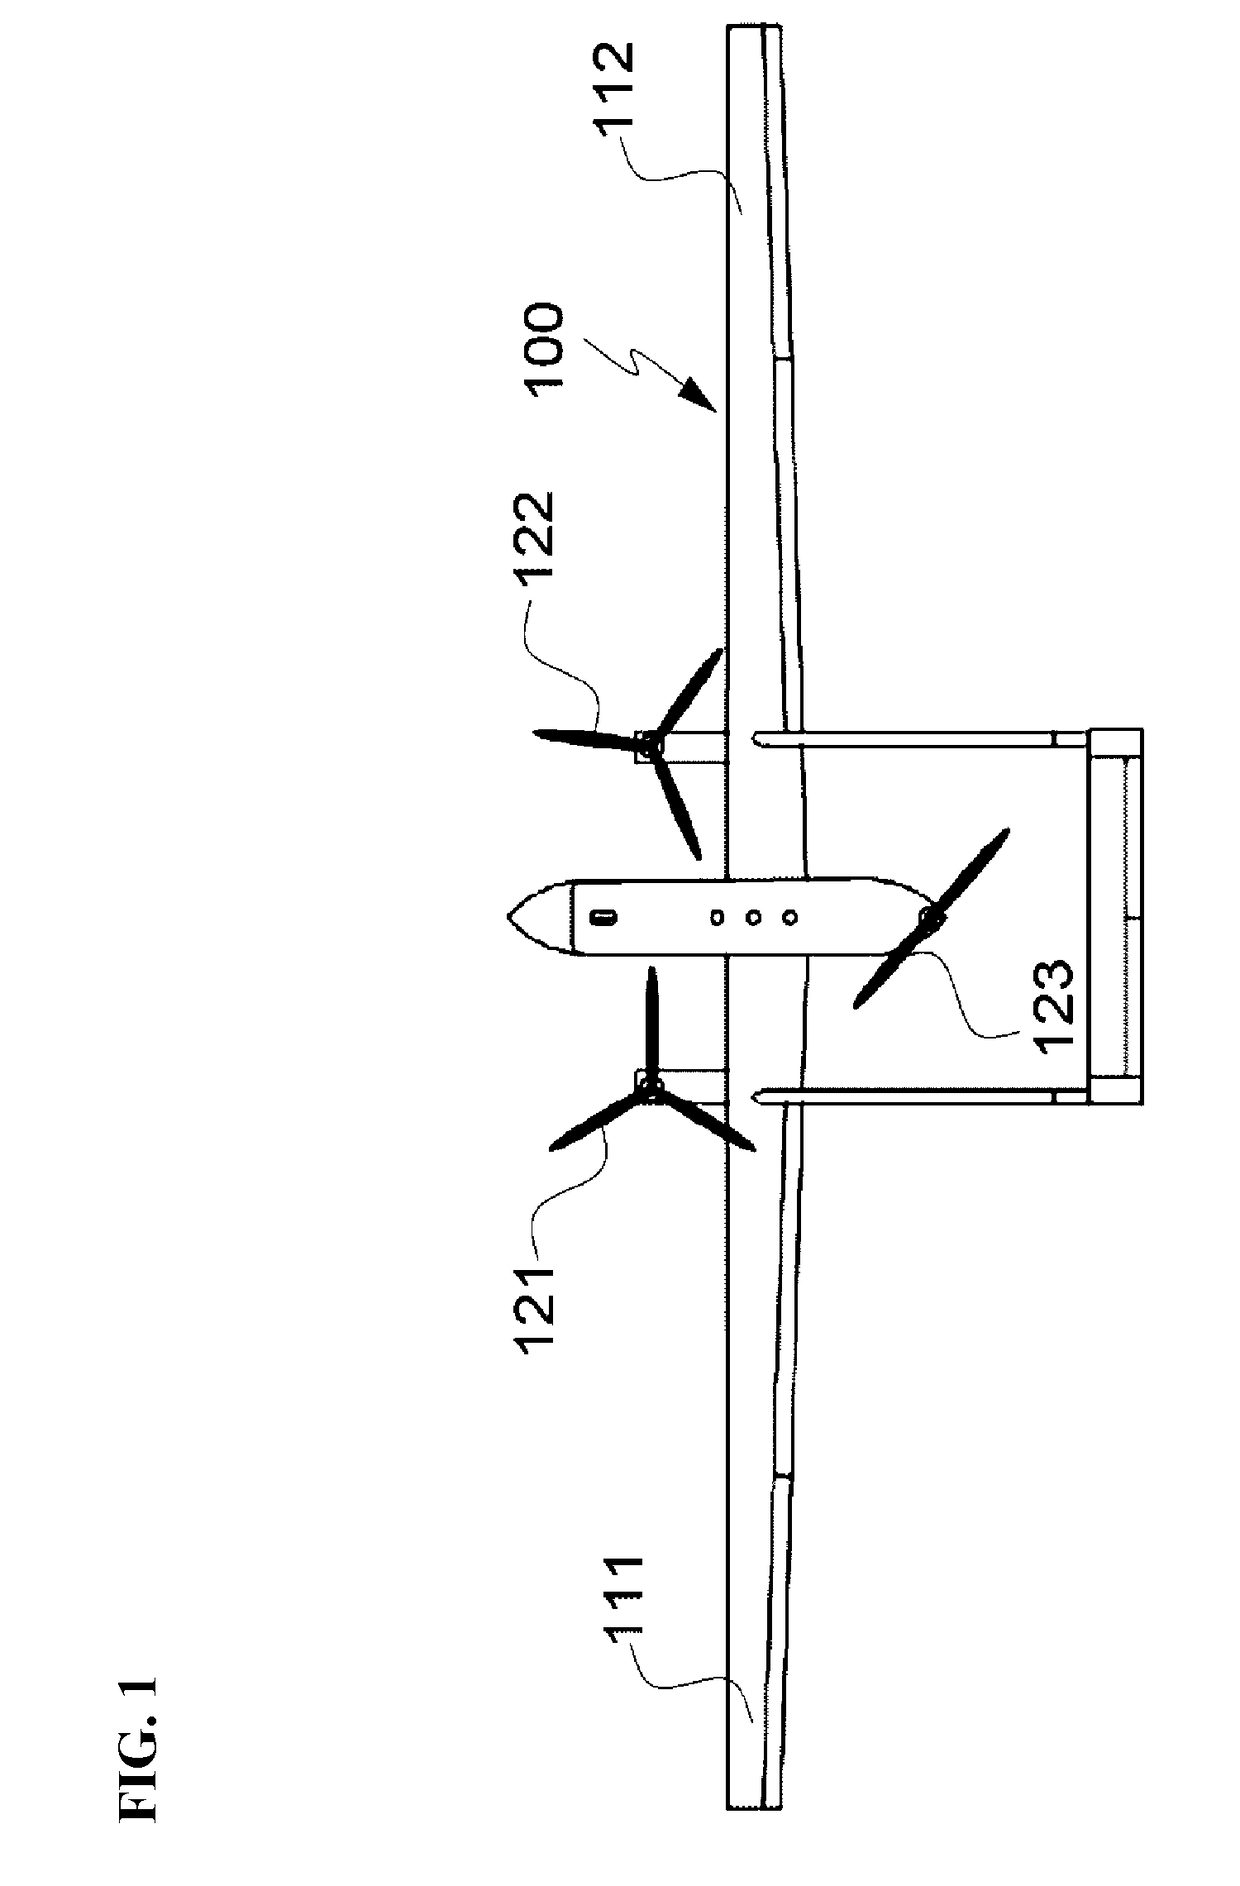 Vertical take-off and landing aircraft using hybrid-electric propulsion system